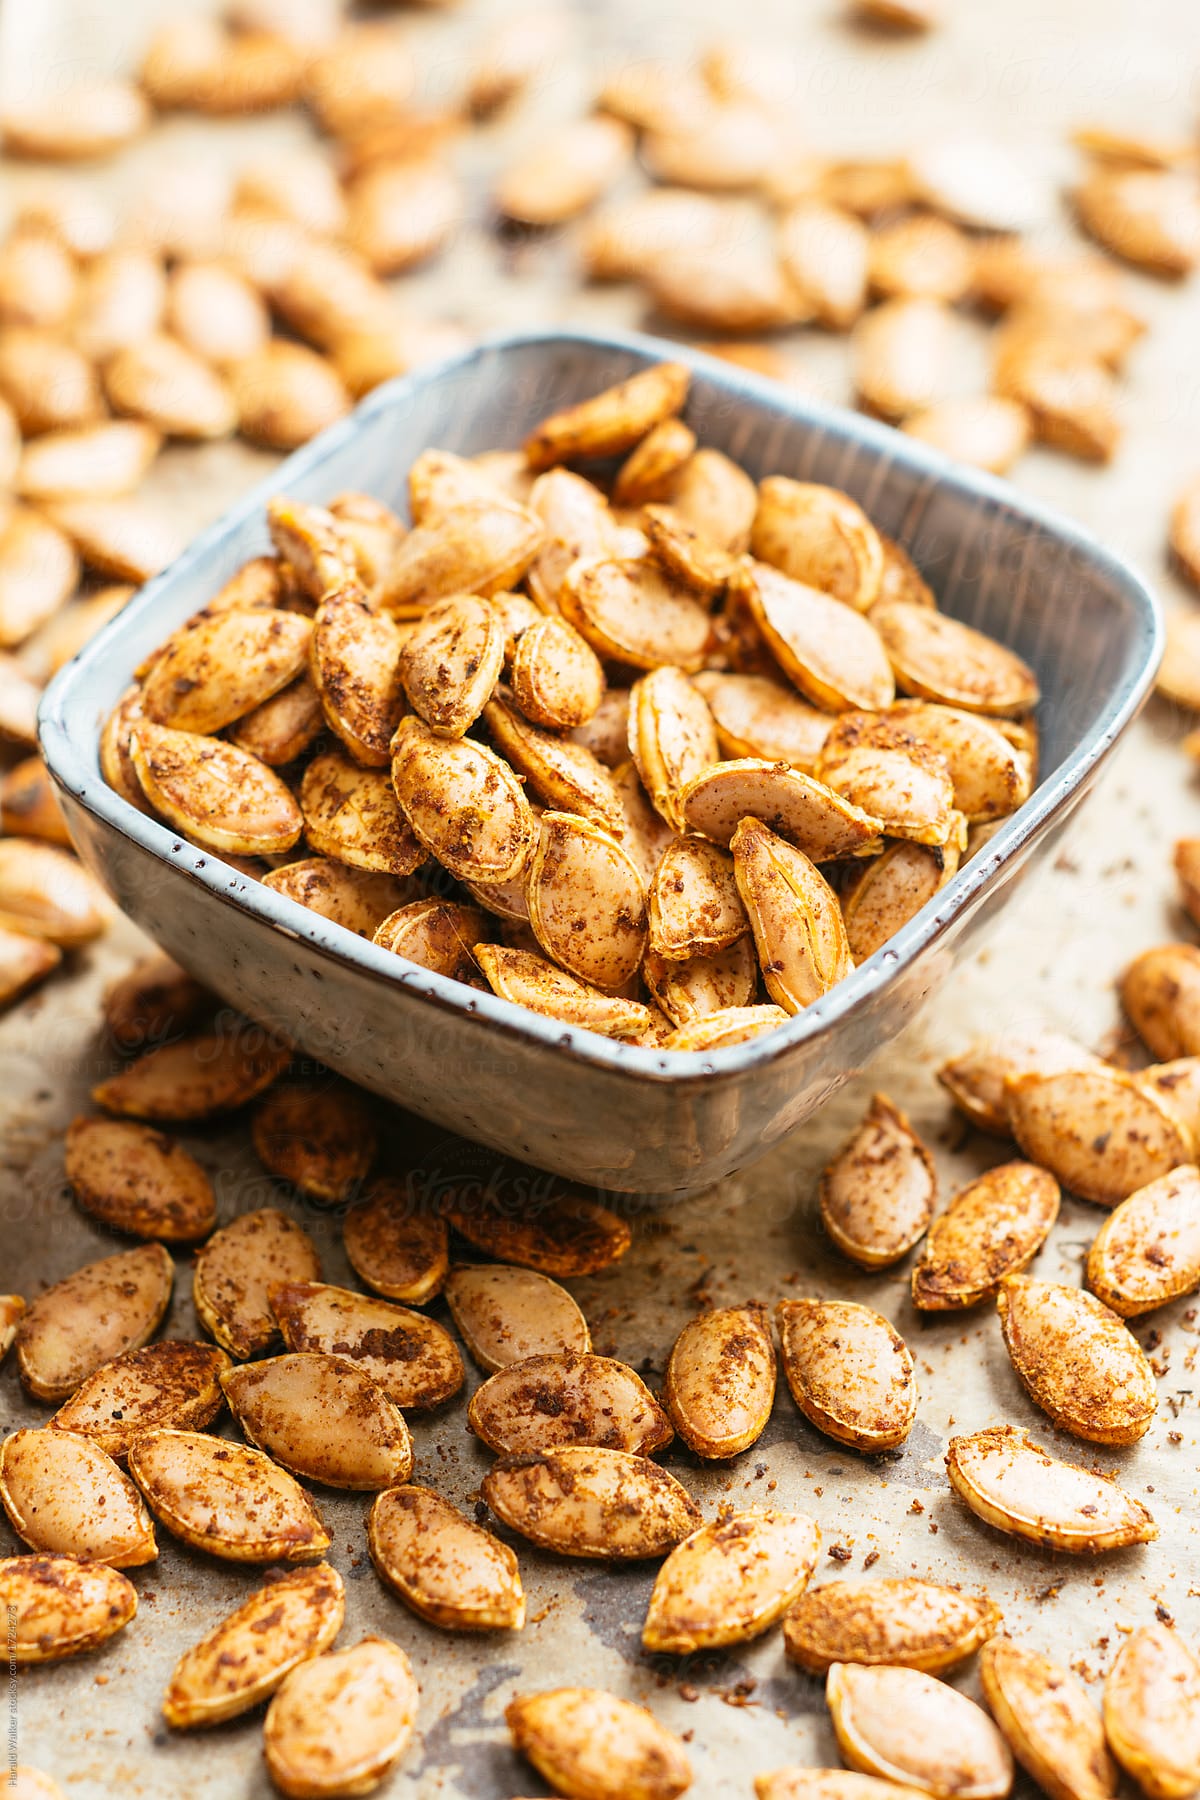 Spicy roasted squash seeds